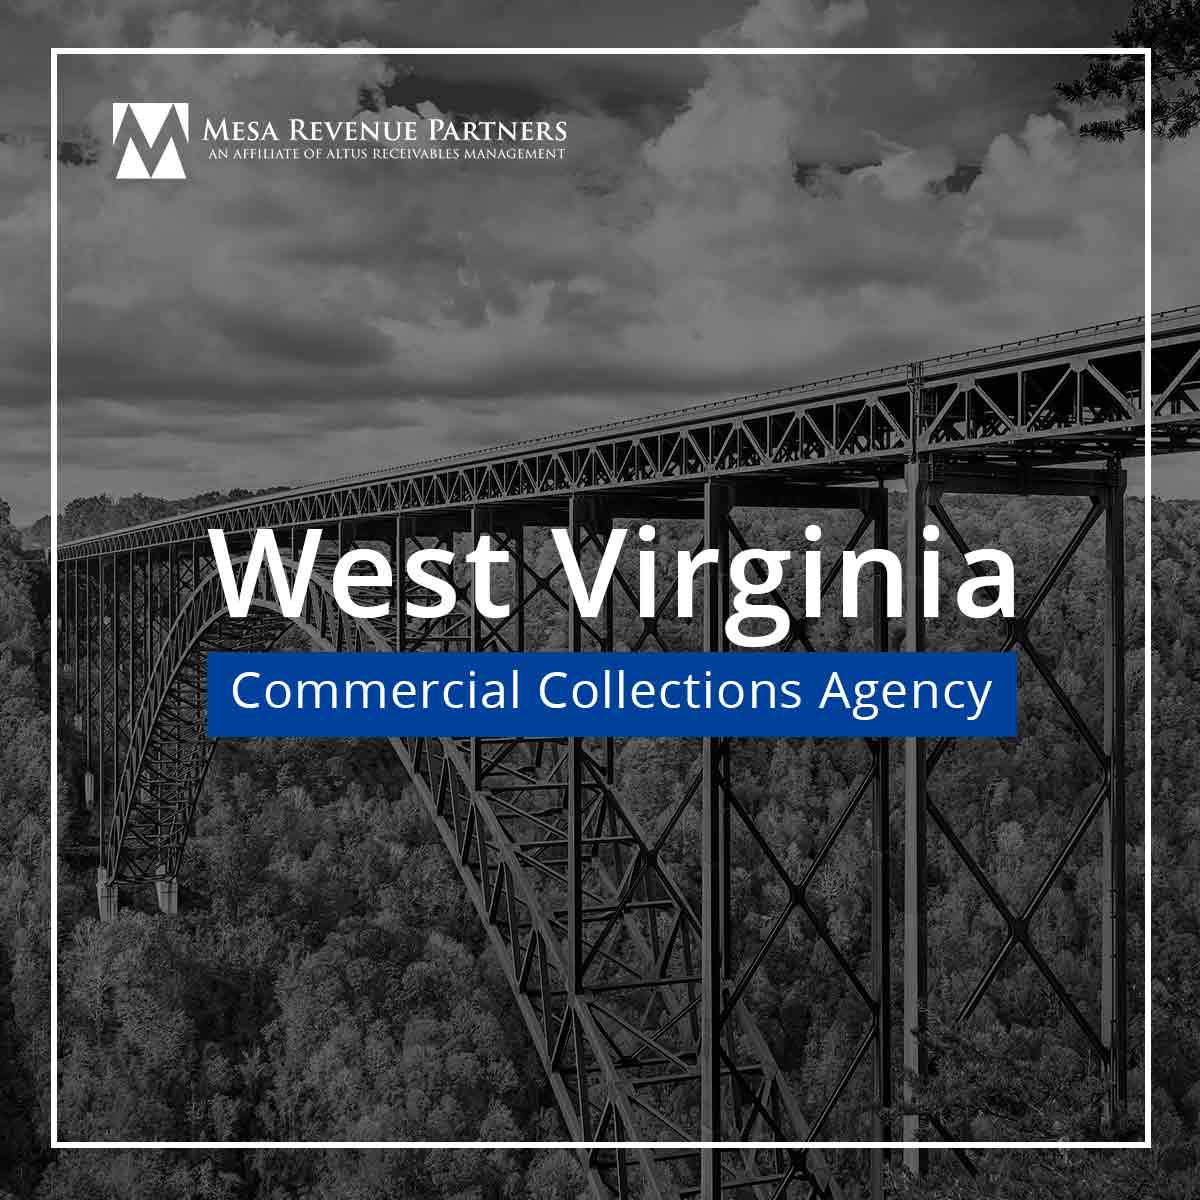 West Virginia Commercial Collections Agency Mesa Revenue Partners